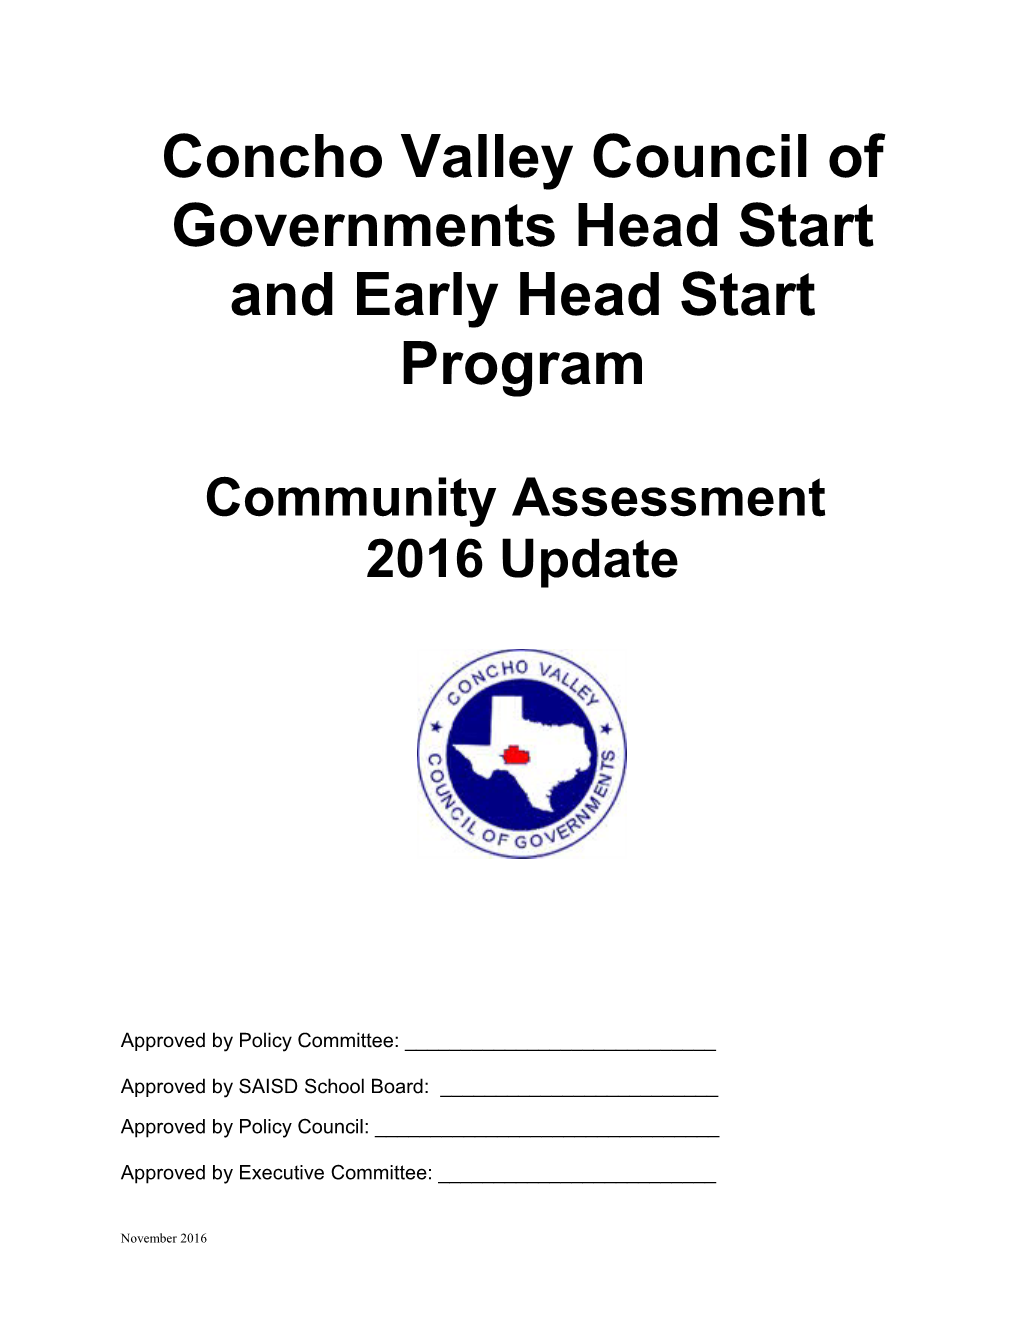 Concho Valley Council of Governments Rural Head Start Program